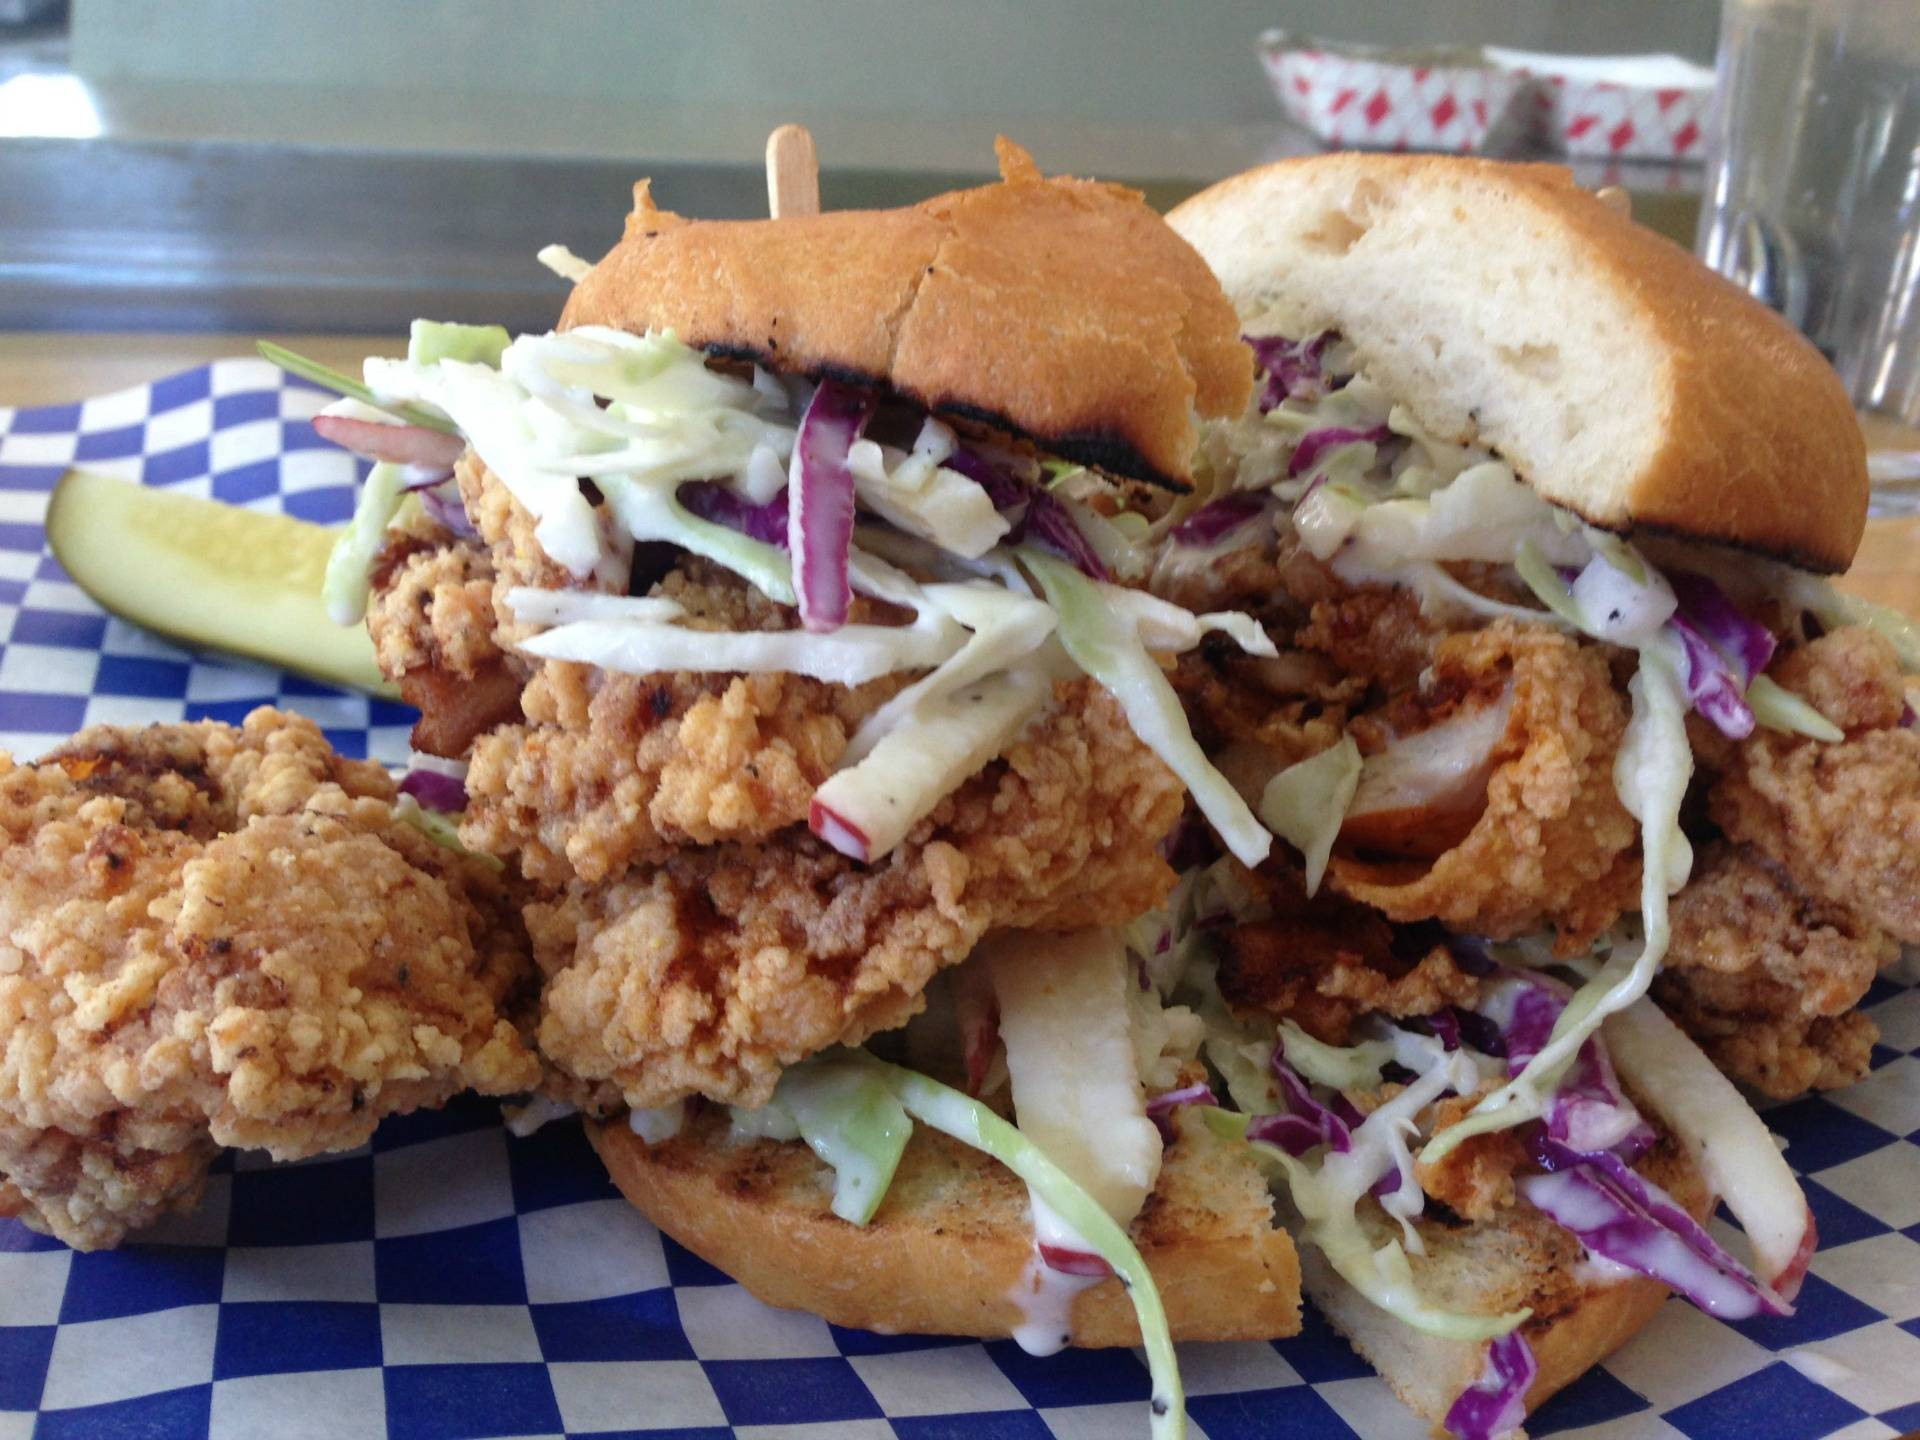 Fried Chicken Sandwich San Francisco
 Guide to 7 Favorite Fried Chicken Sandwiches In San